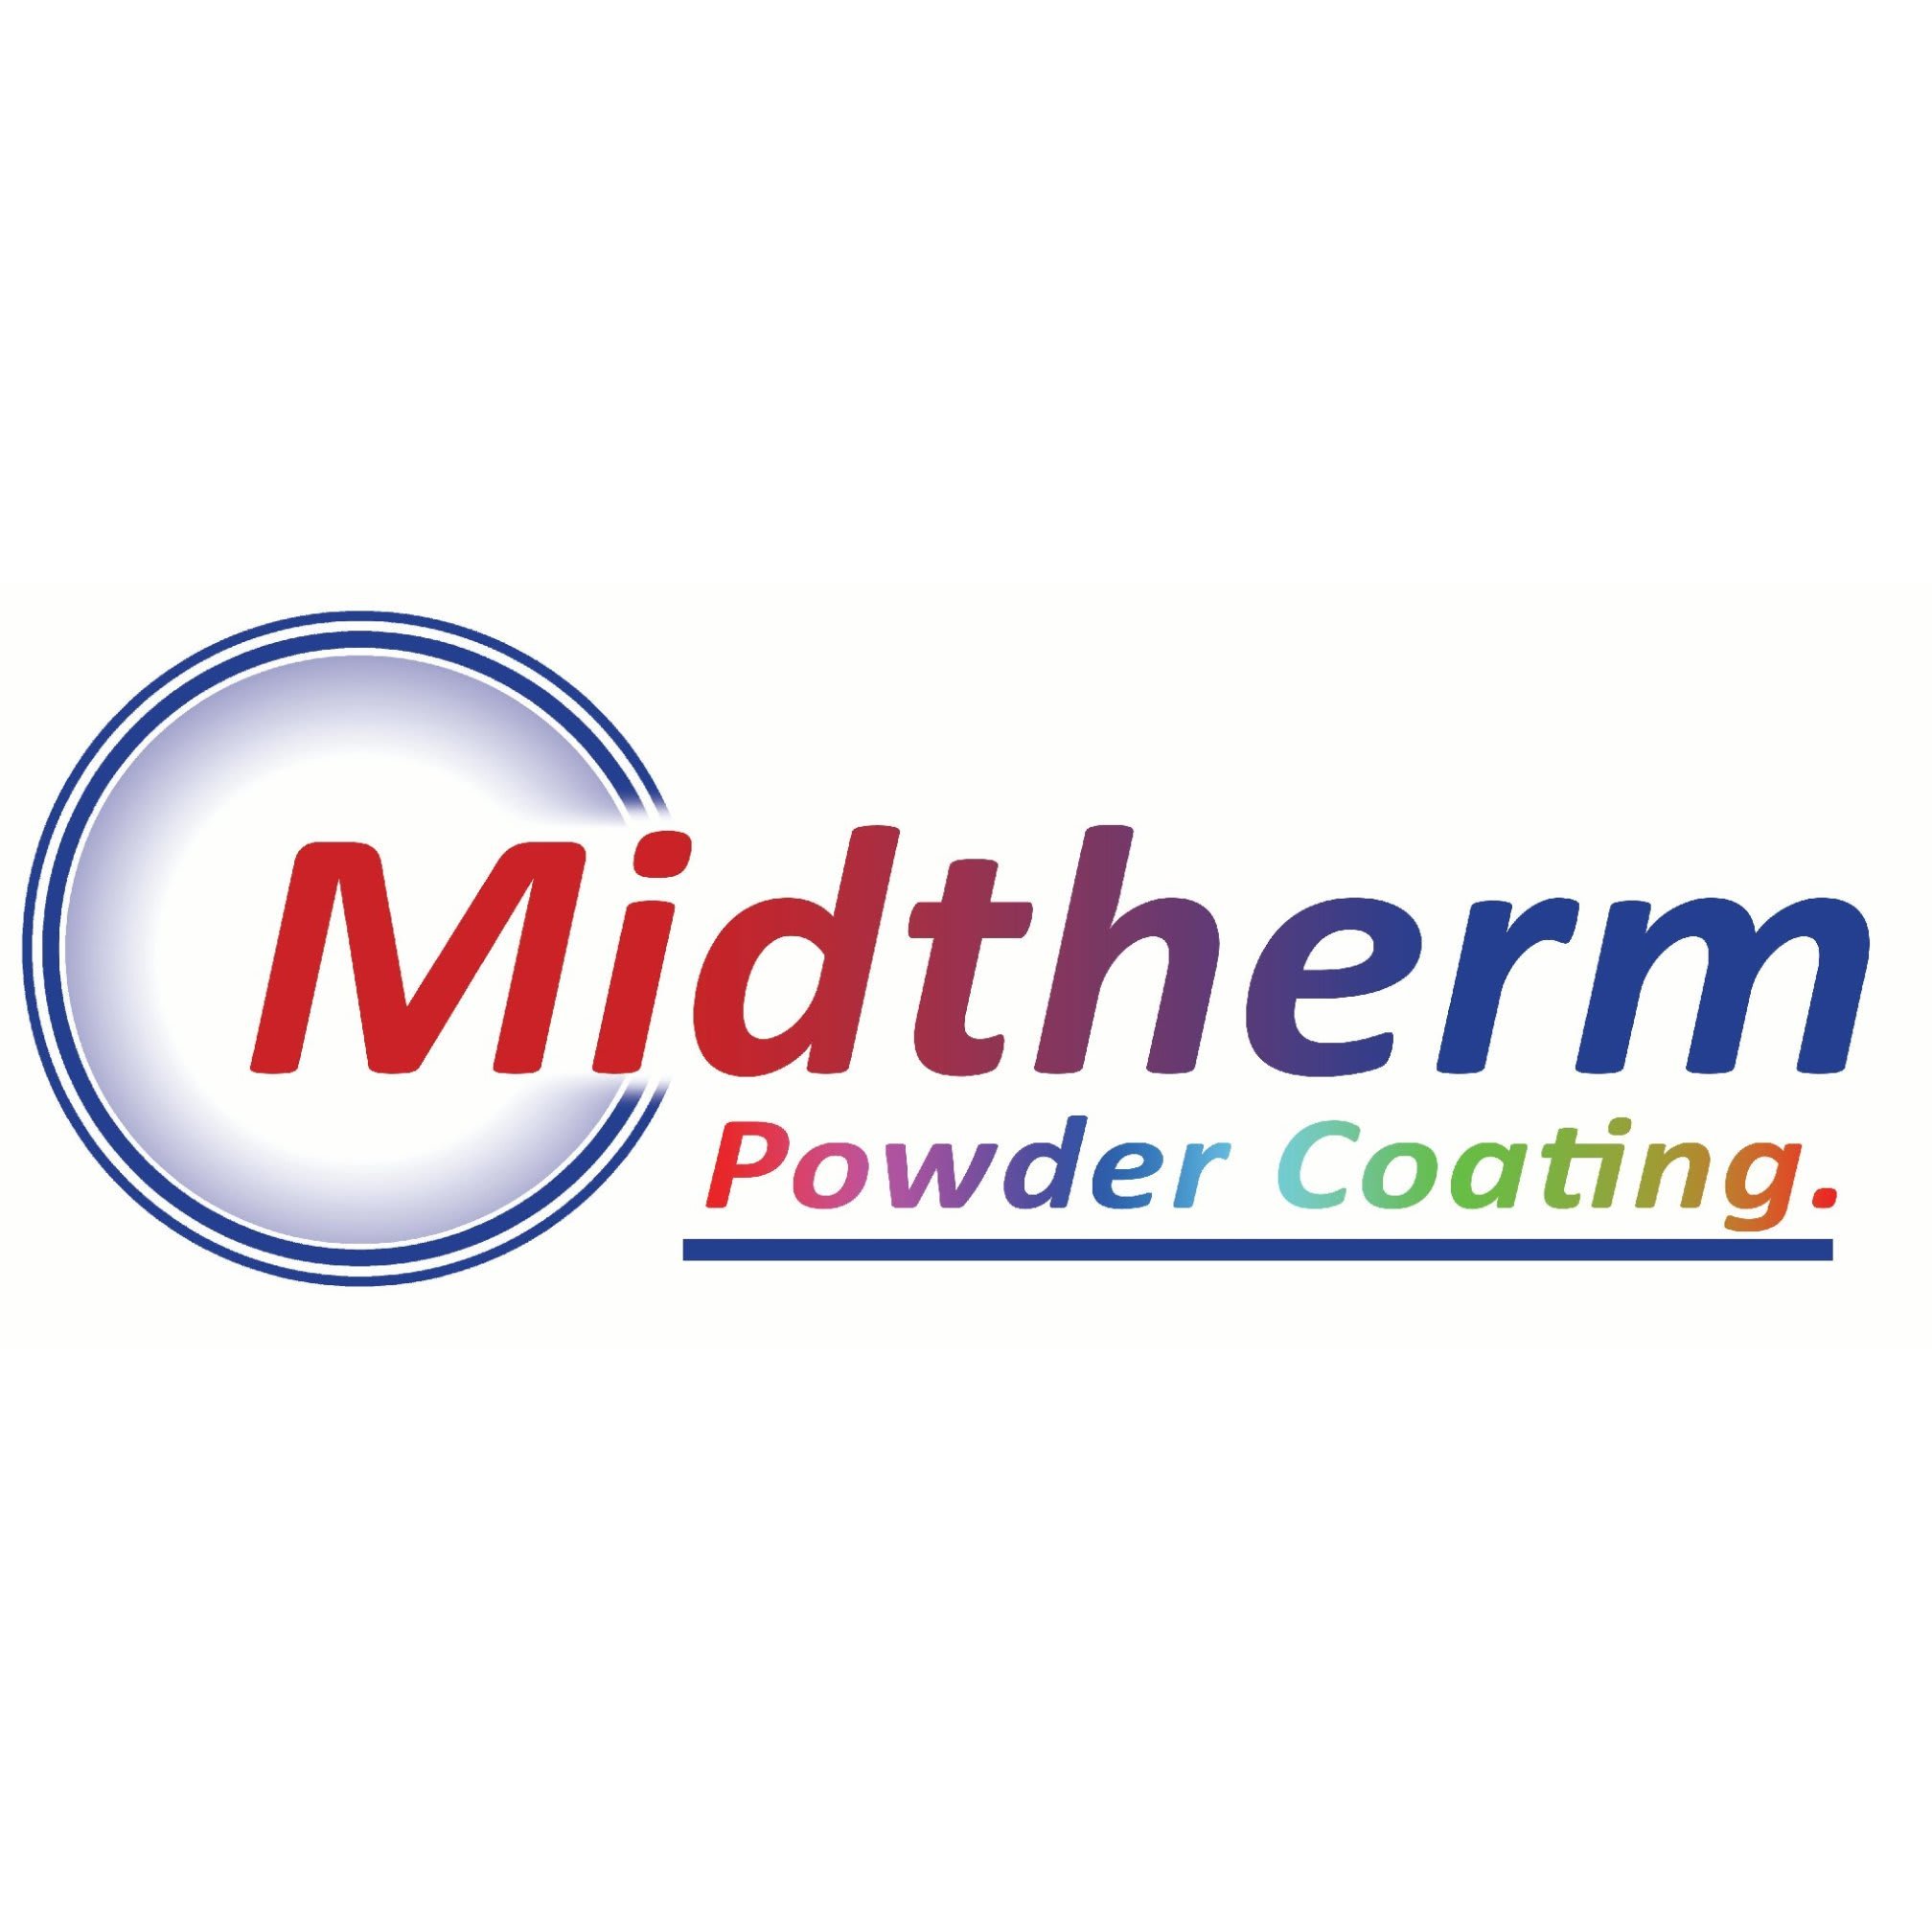 Midtherm Powder Coating - Dudley, West Midlands DY2 8TS - 01384 258877 | ShowMeLocal.com